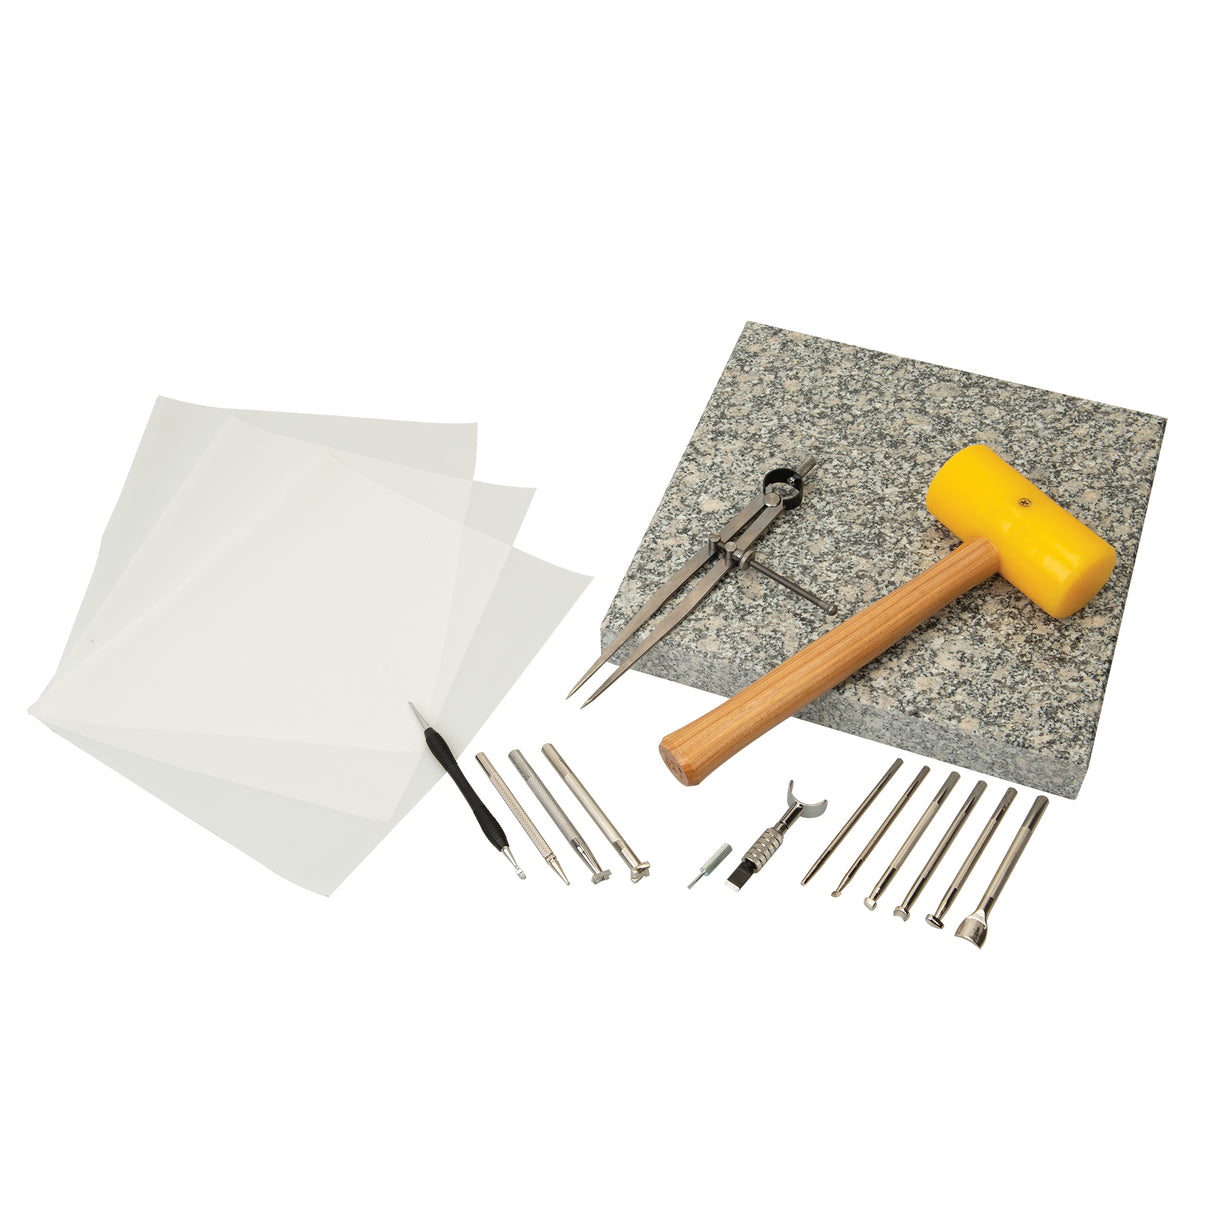 Leather Tooling Kit